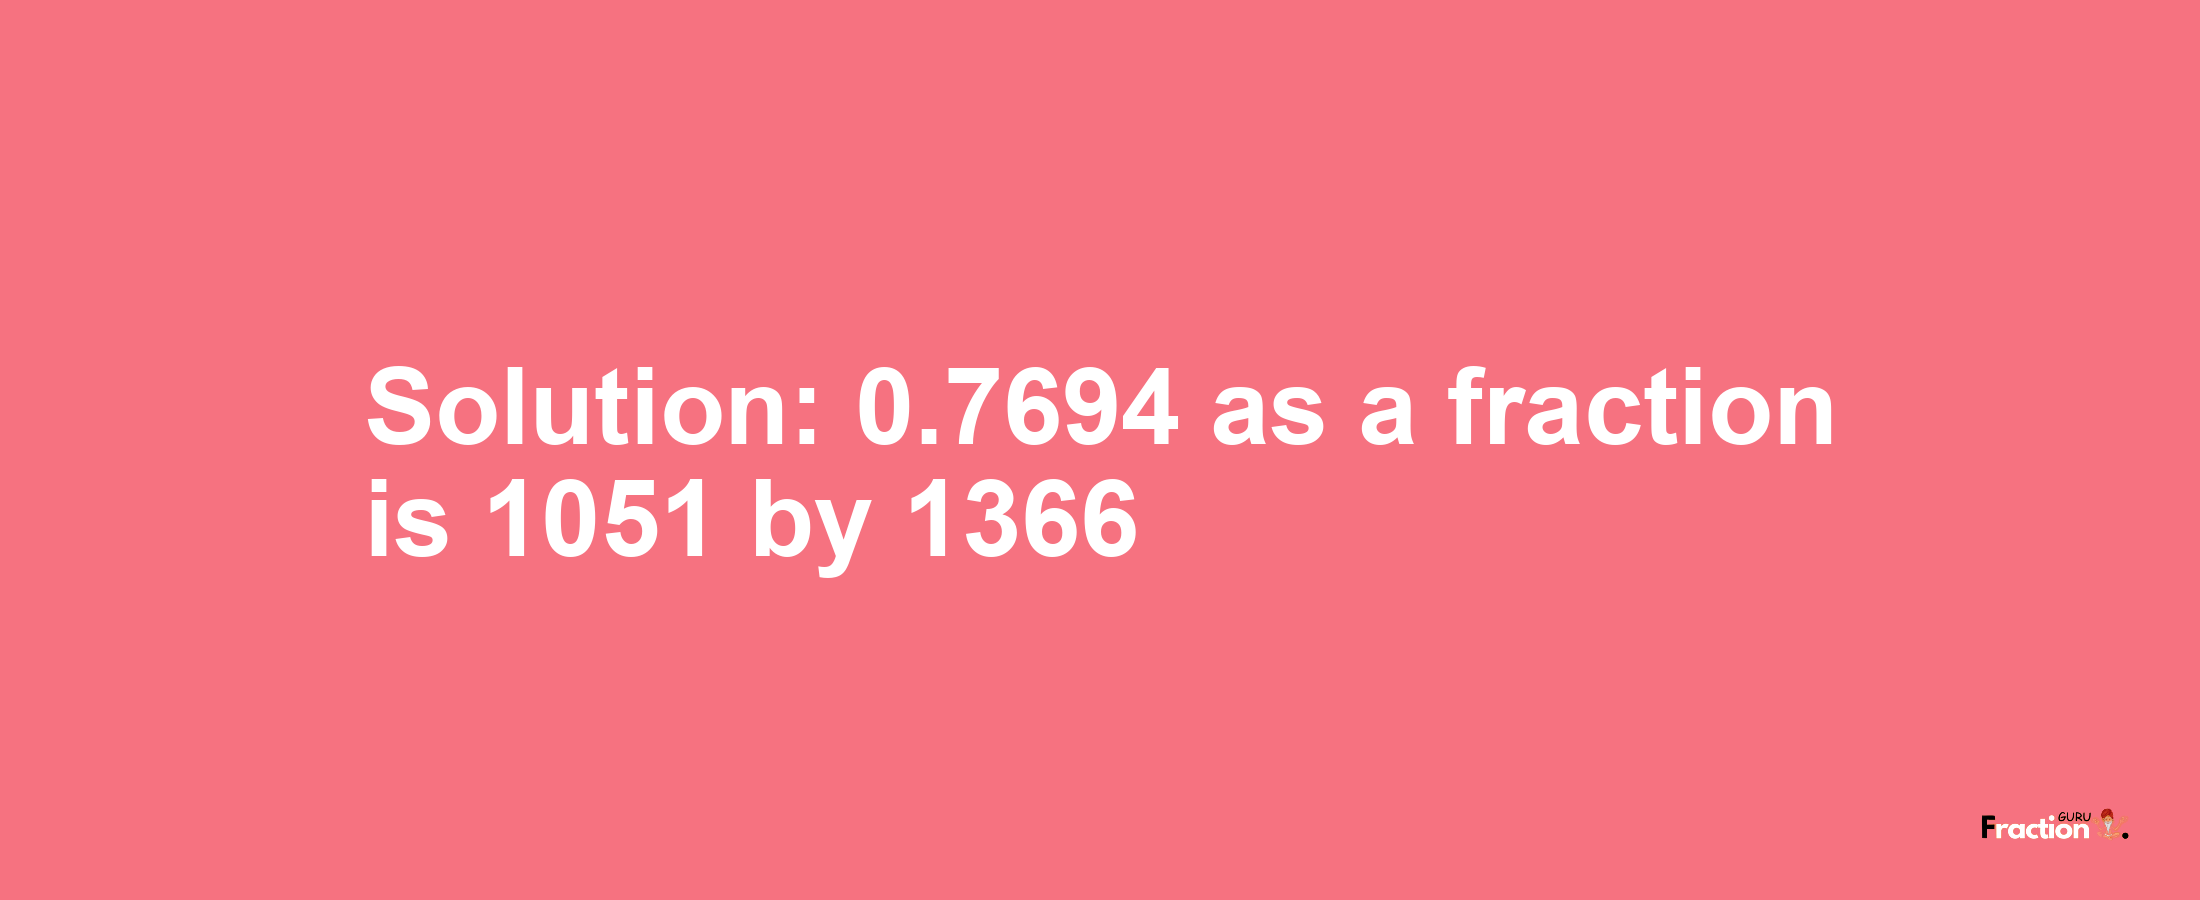 Solution:0.7694 as a fraction is 1051/1366